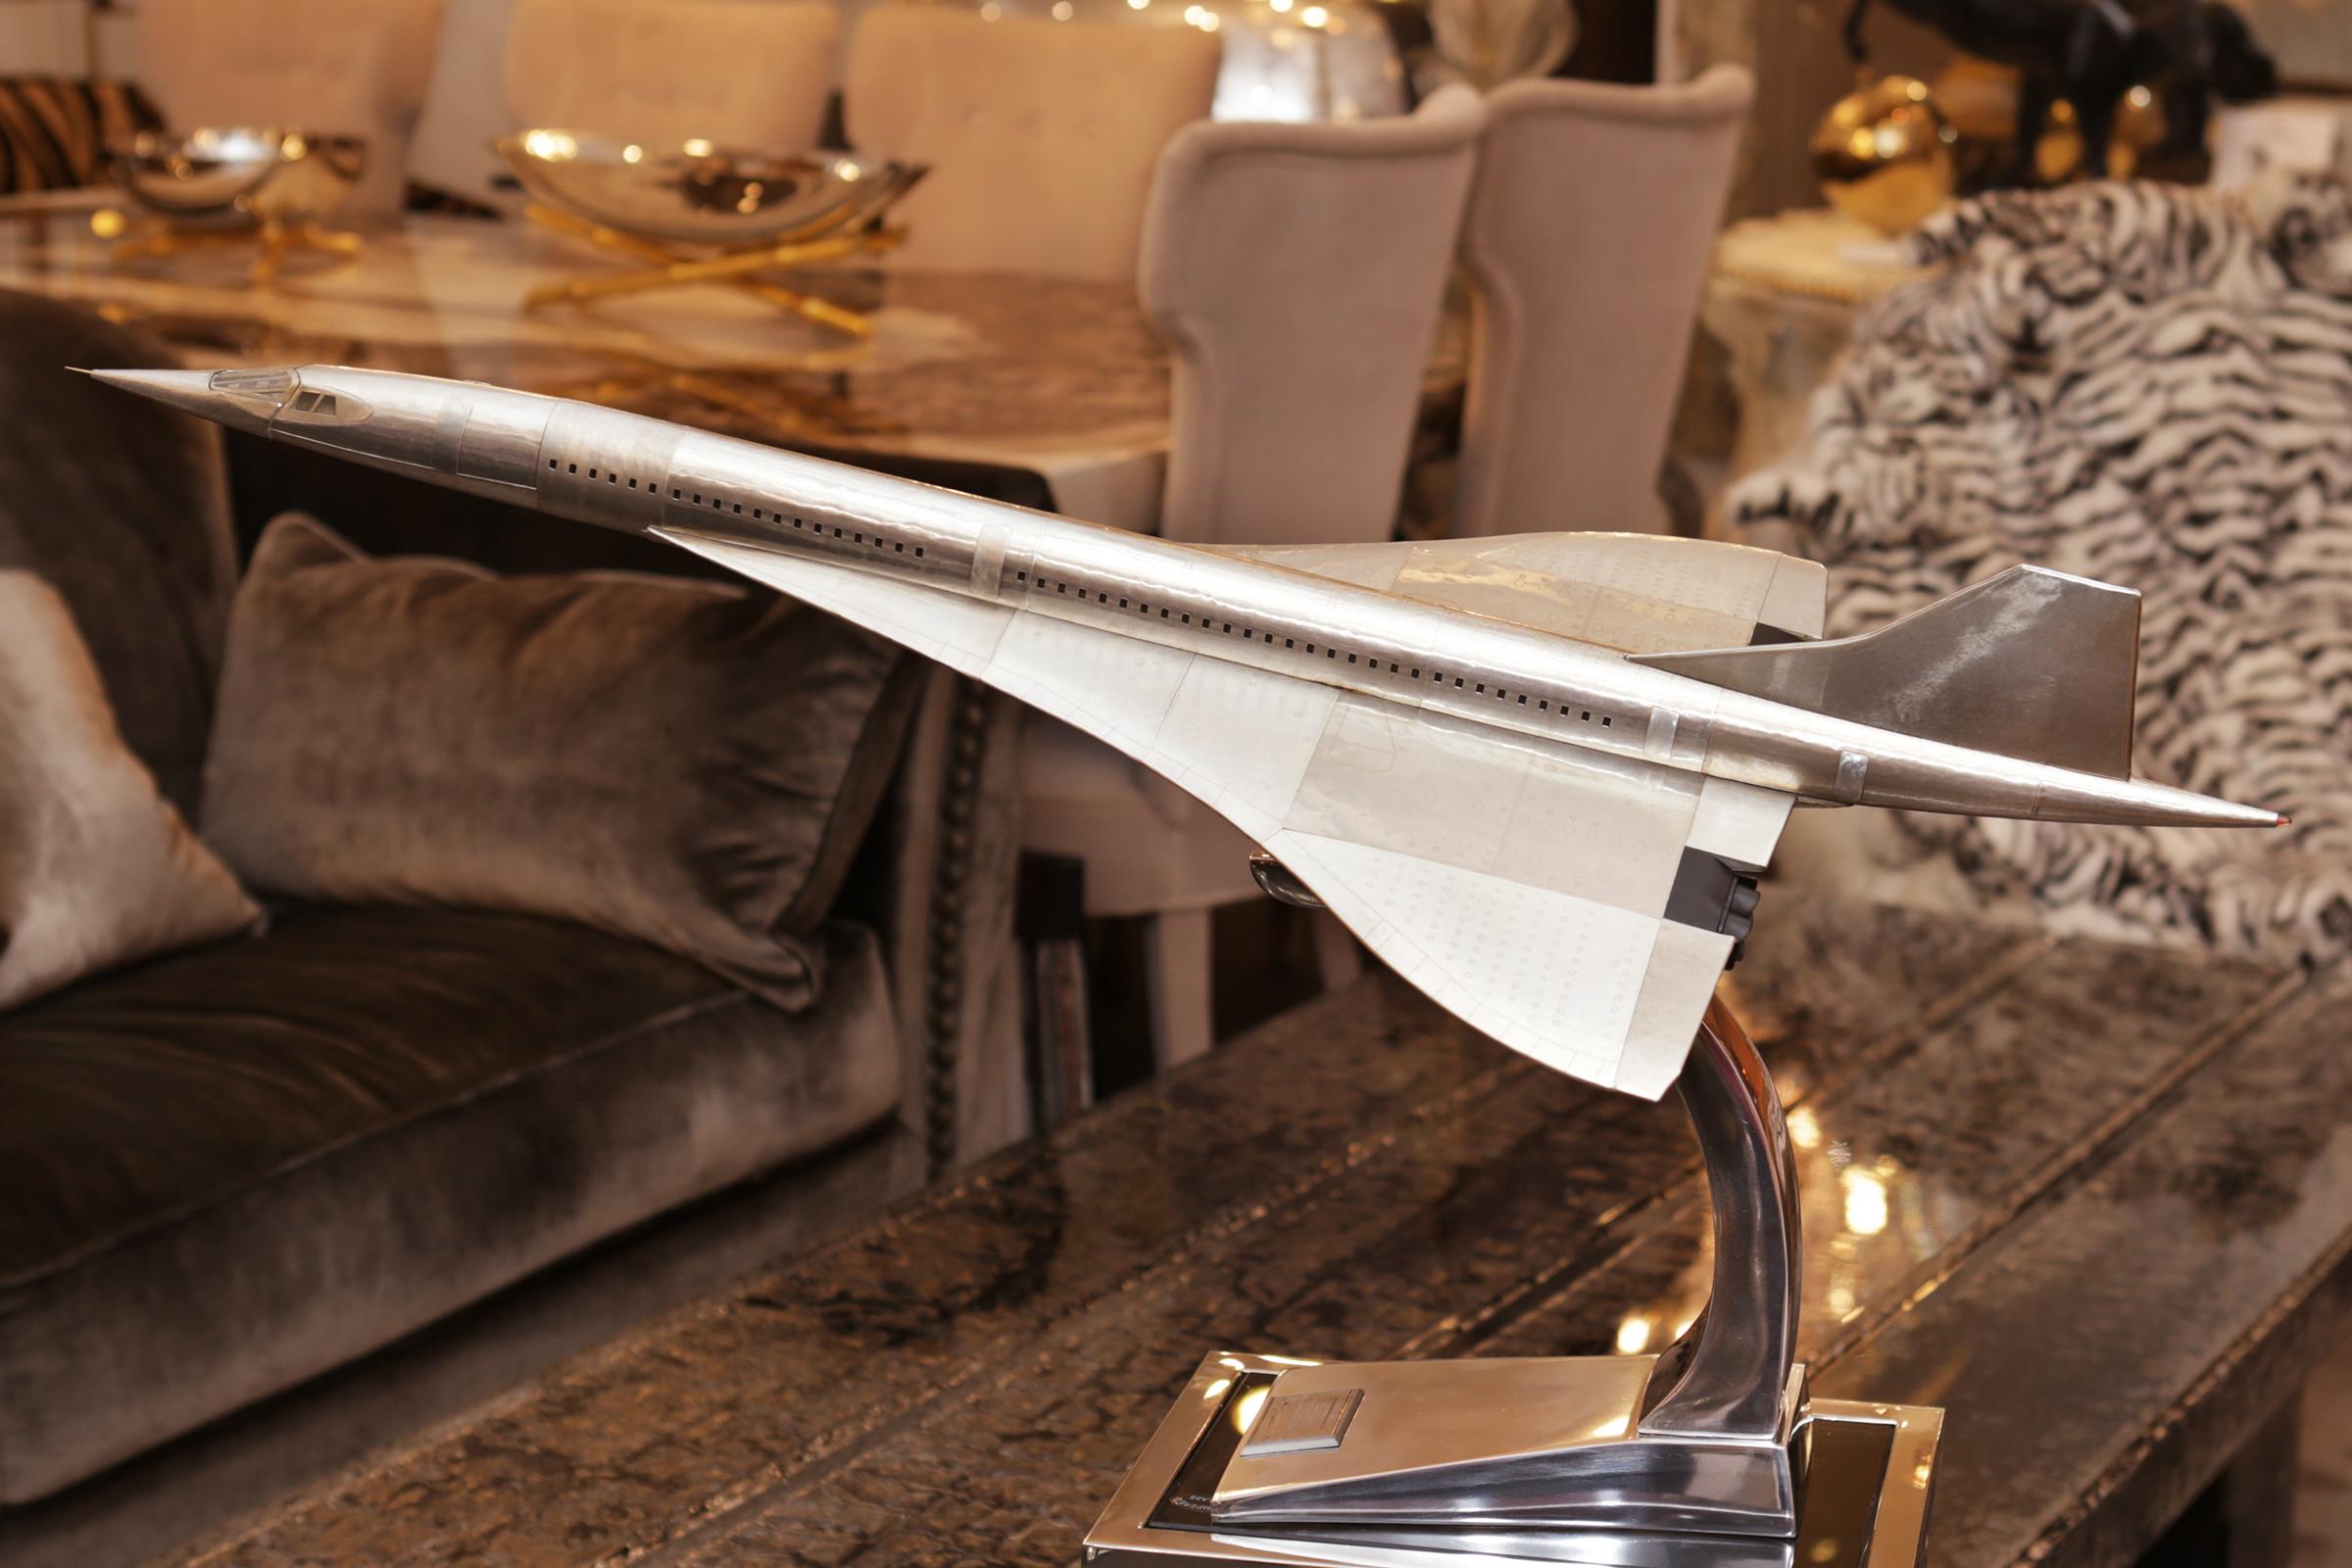 Model Concorde supersonic with light wooden body and
all covered with riveted aluminium foil. On polished stainless
steel base with item's descriptive plaque.